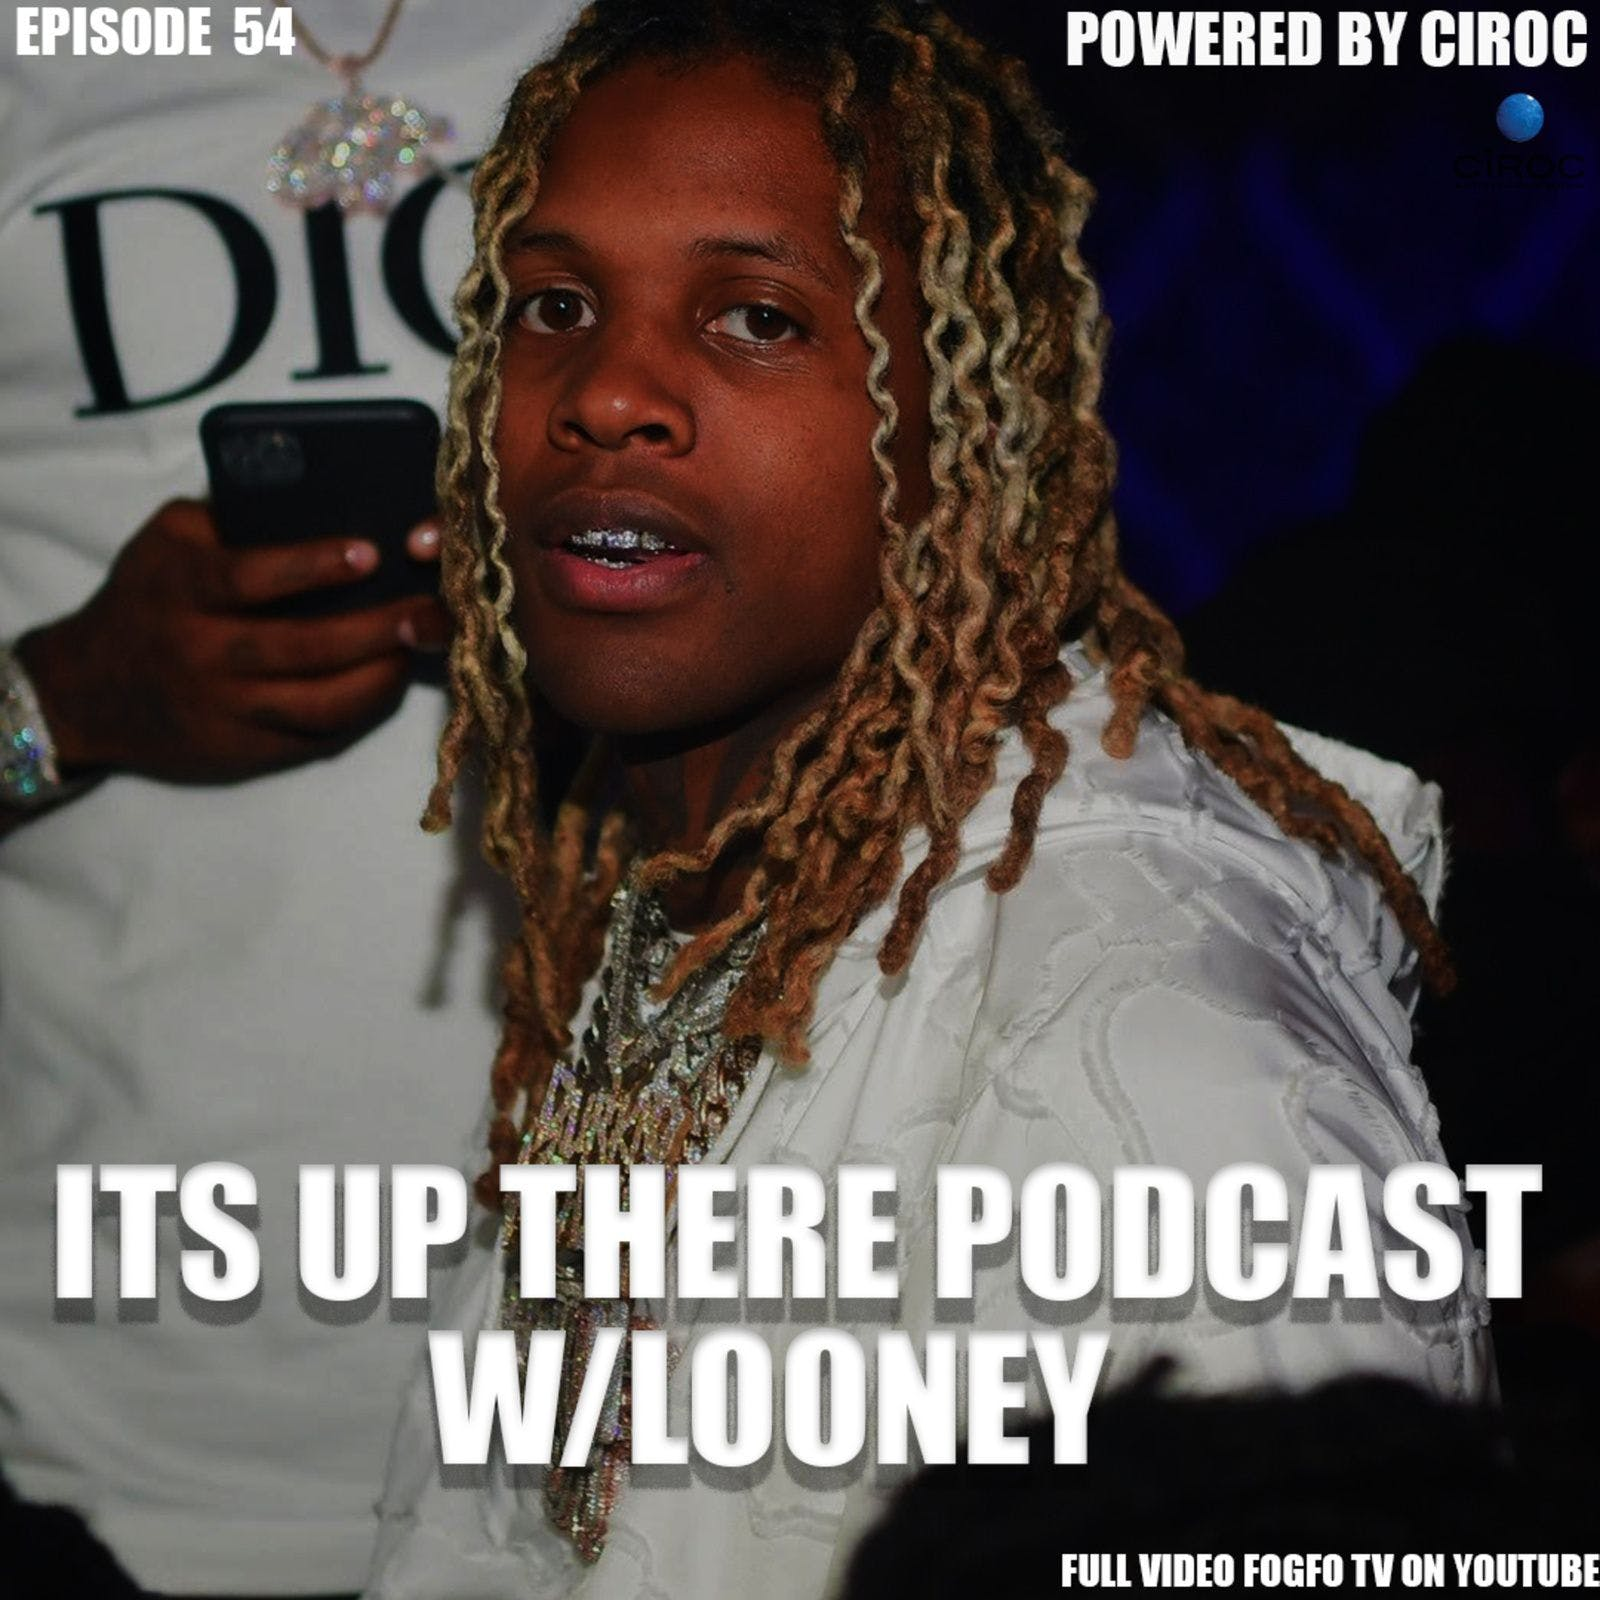 ITS UP THERE PODCAST EP 54 | "FANS VS CUSTOMERS"|WACK 100 GANG BANGER VS GANG REPRESENTATIVES| LIL DURK SCARED OR PREPARED TO DIE |TIK TOK & YOUTUBE FIGHT "SCAM" EXPLAINED | WEIRD WAY RAPPER GET MONEY